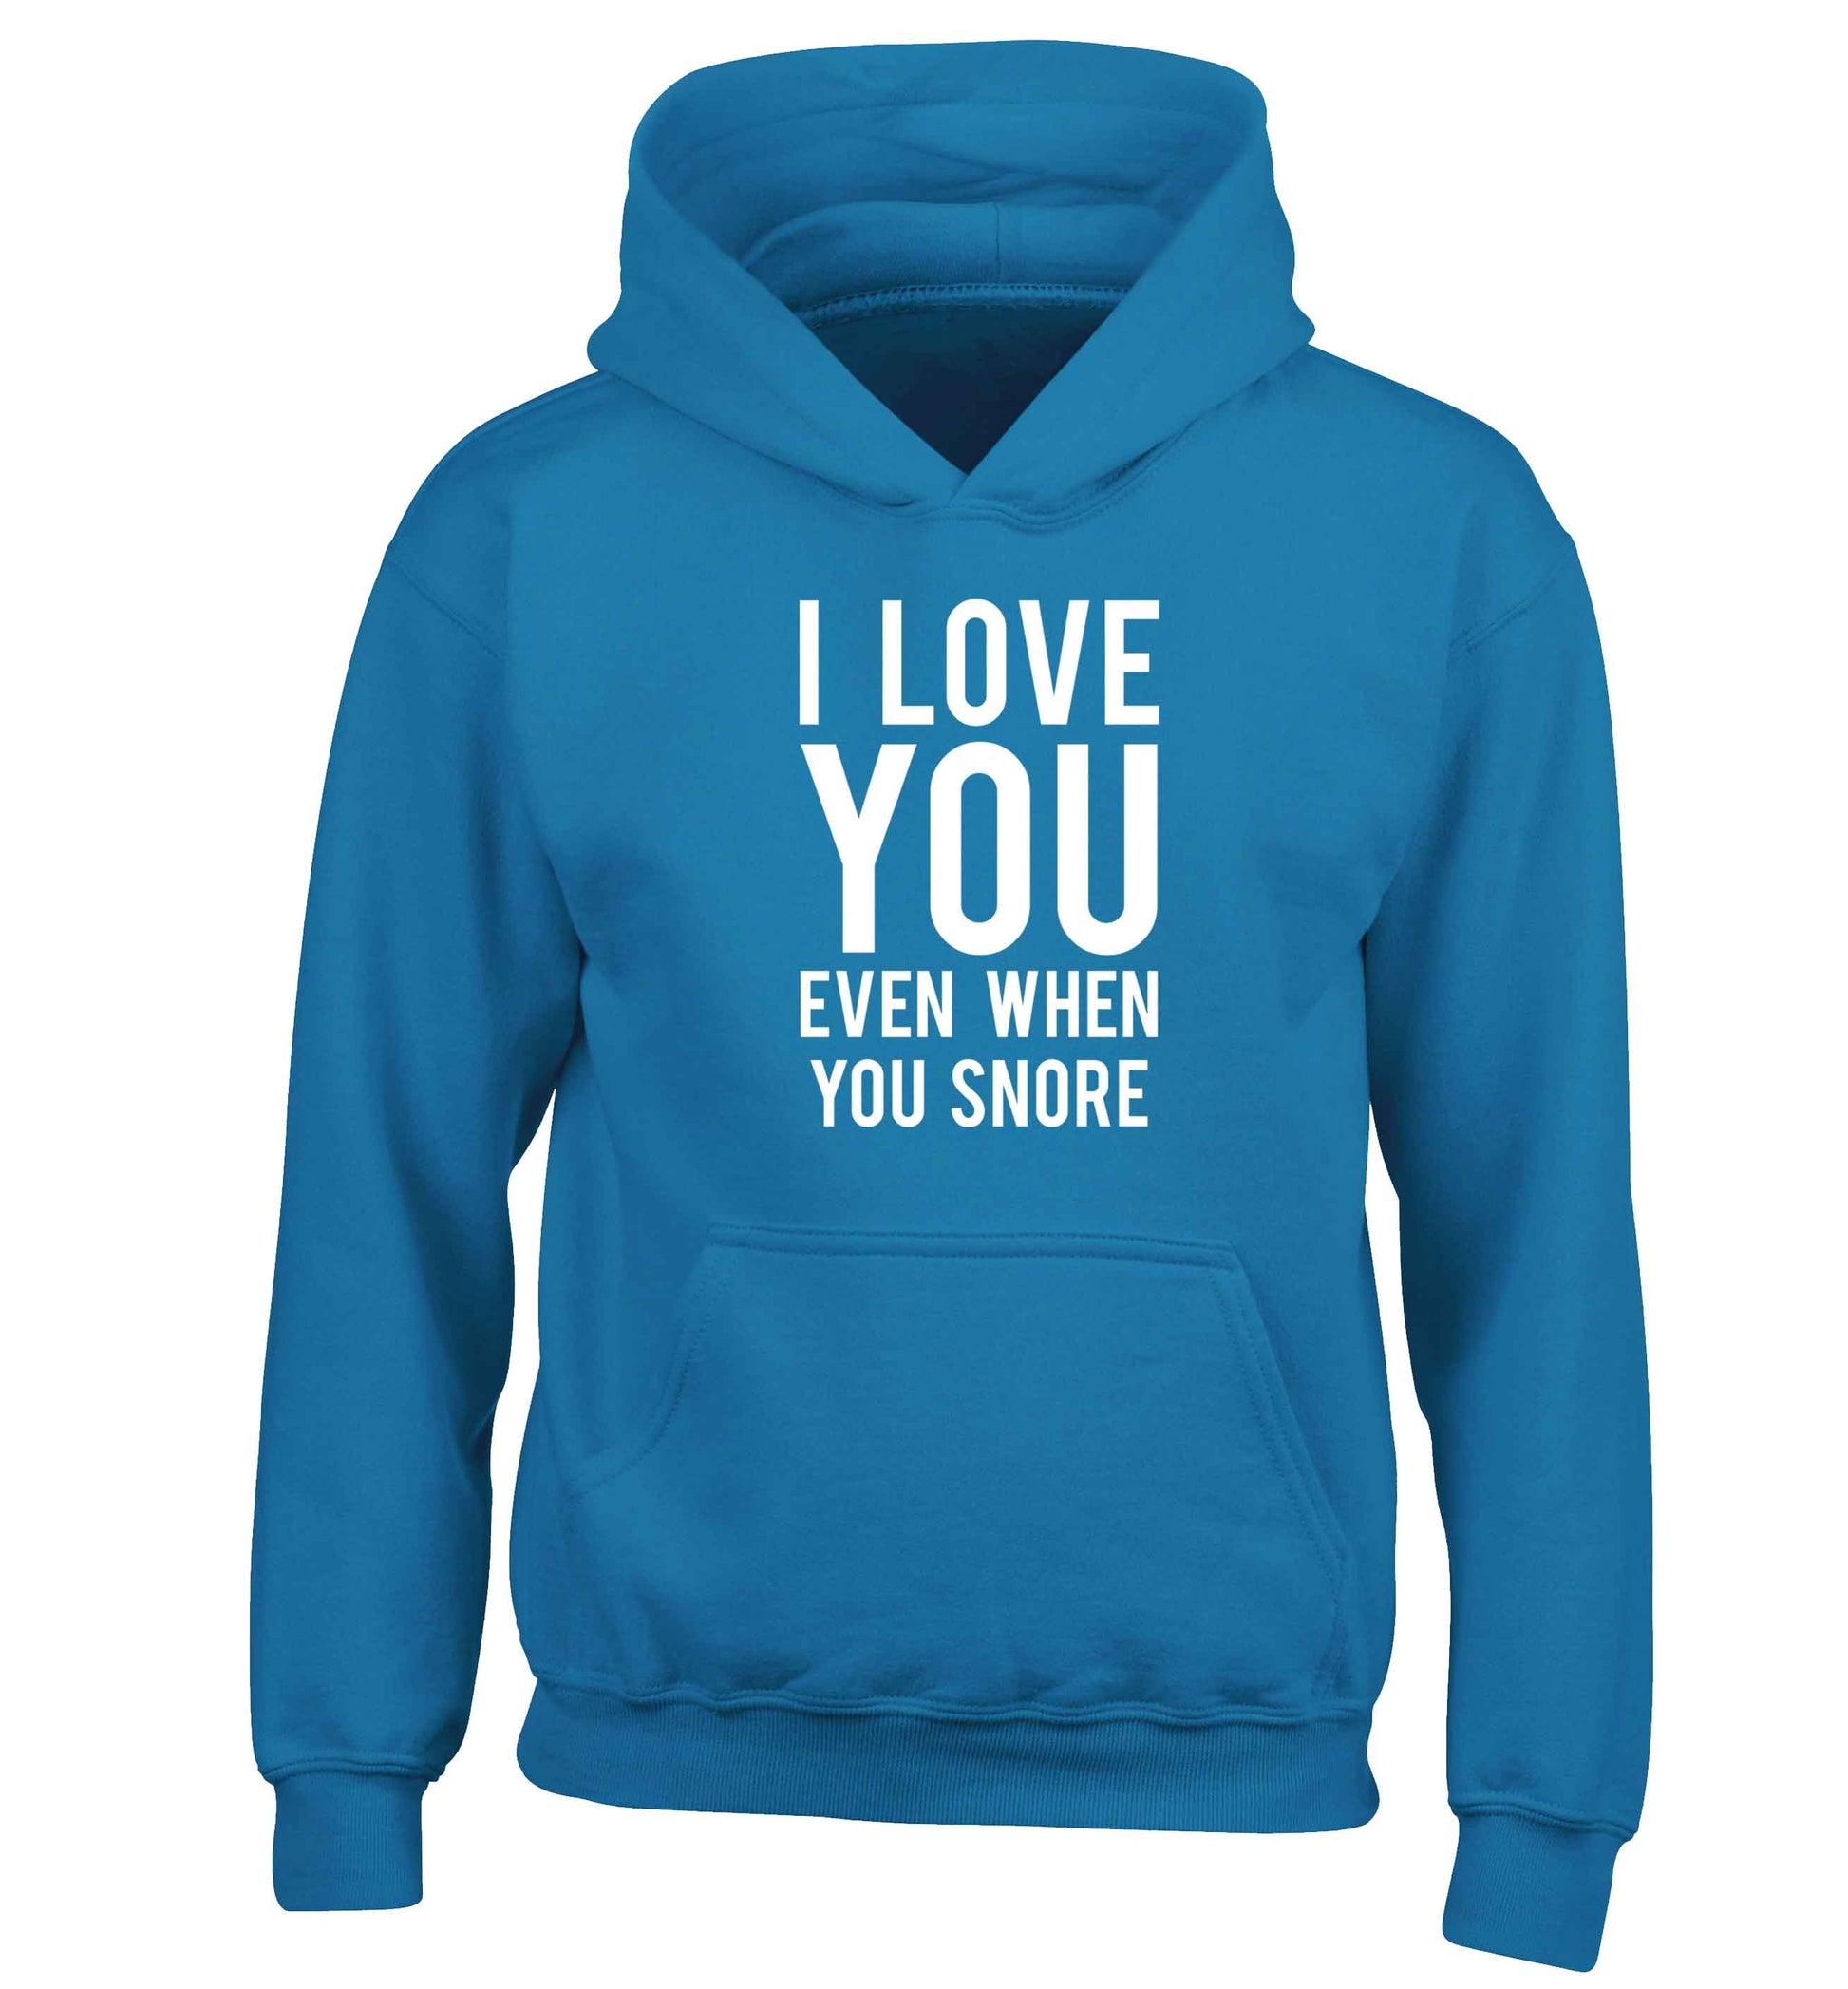 I love you even when you snore children's blue hoodie 12-13 Years